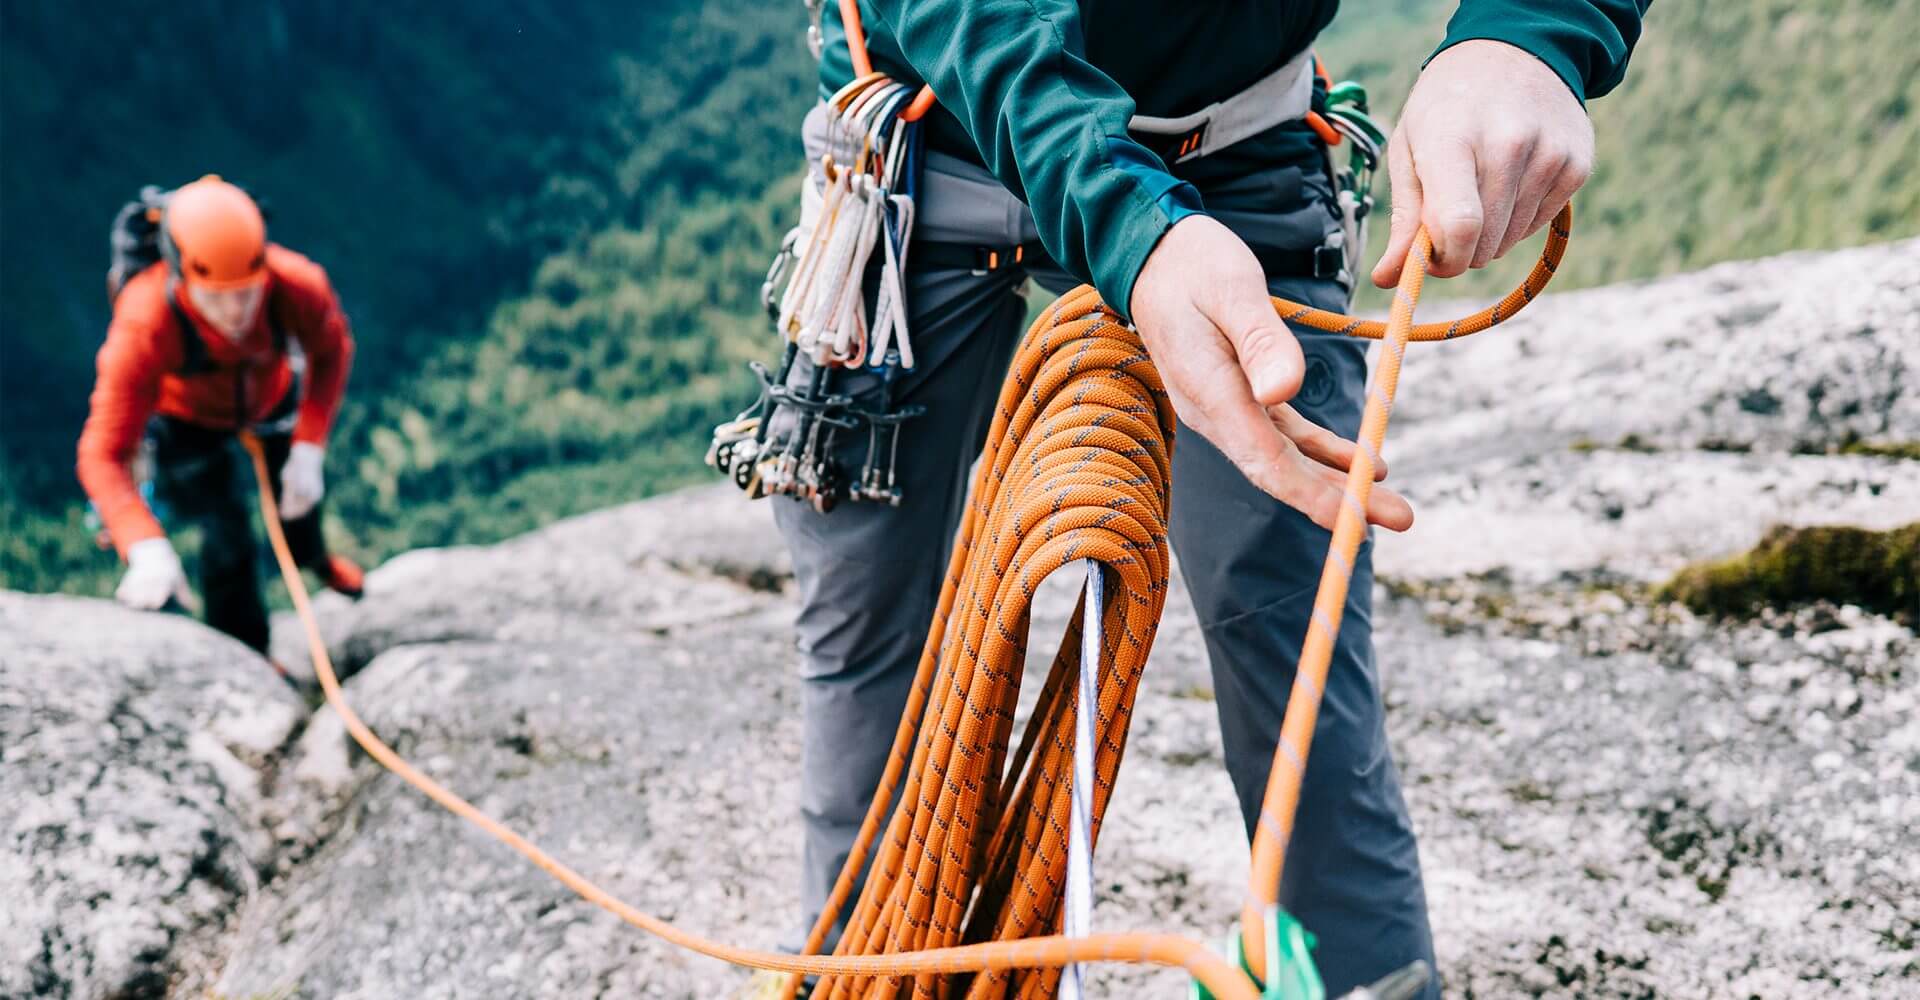 Managing risk is shown as two climbers use safety rope to pull themselves up a cliff face.